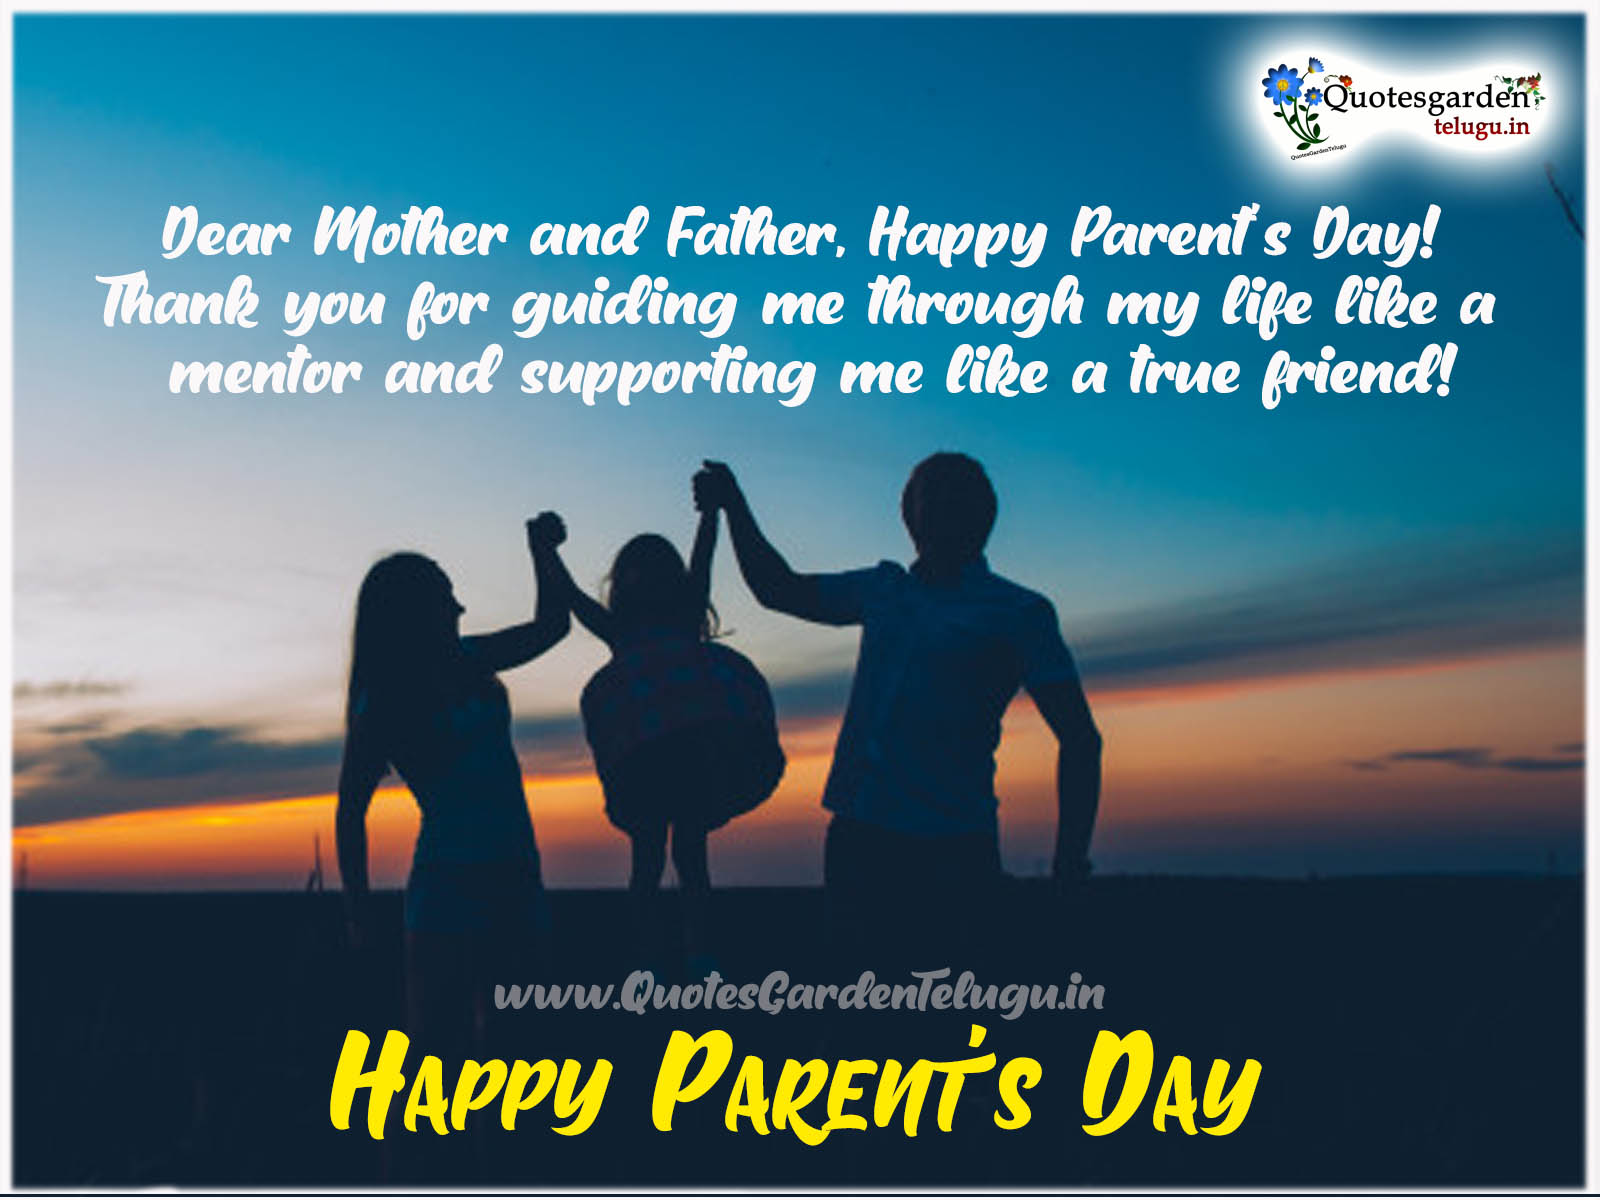 Parents Day Quotes And Sayings Whatsapp Status Sms Quotes Garden Telugu Telugu Quotes English Quotes Hindi Quotes